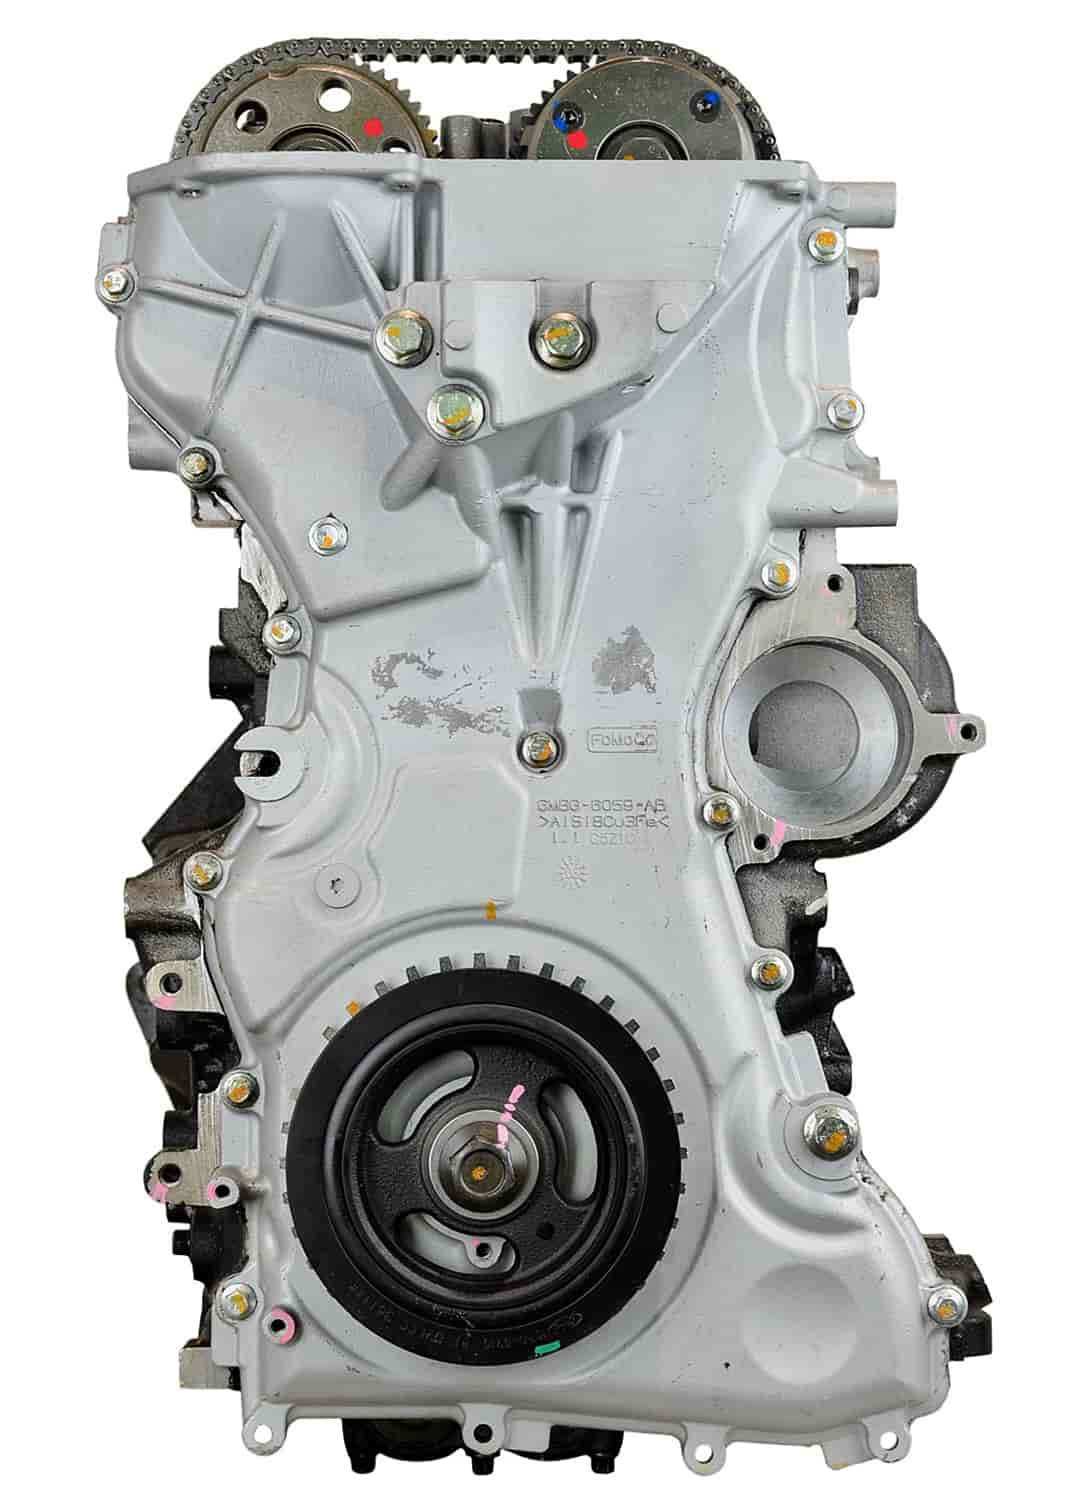 Remanufactured Crate Engine for 2006-2008 Mazda 6 with 2.3L L4